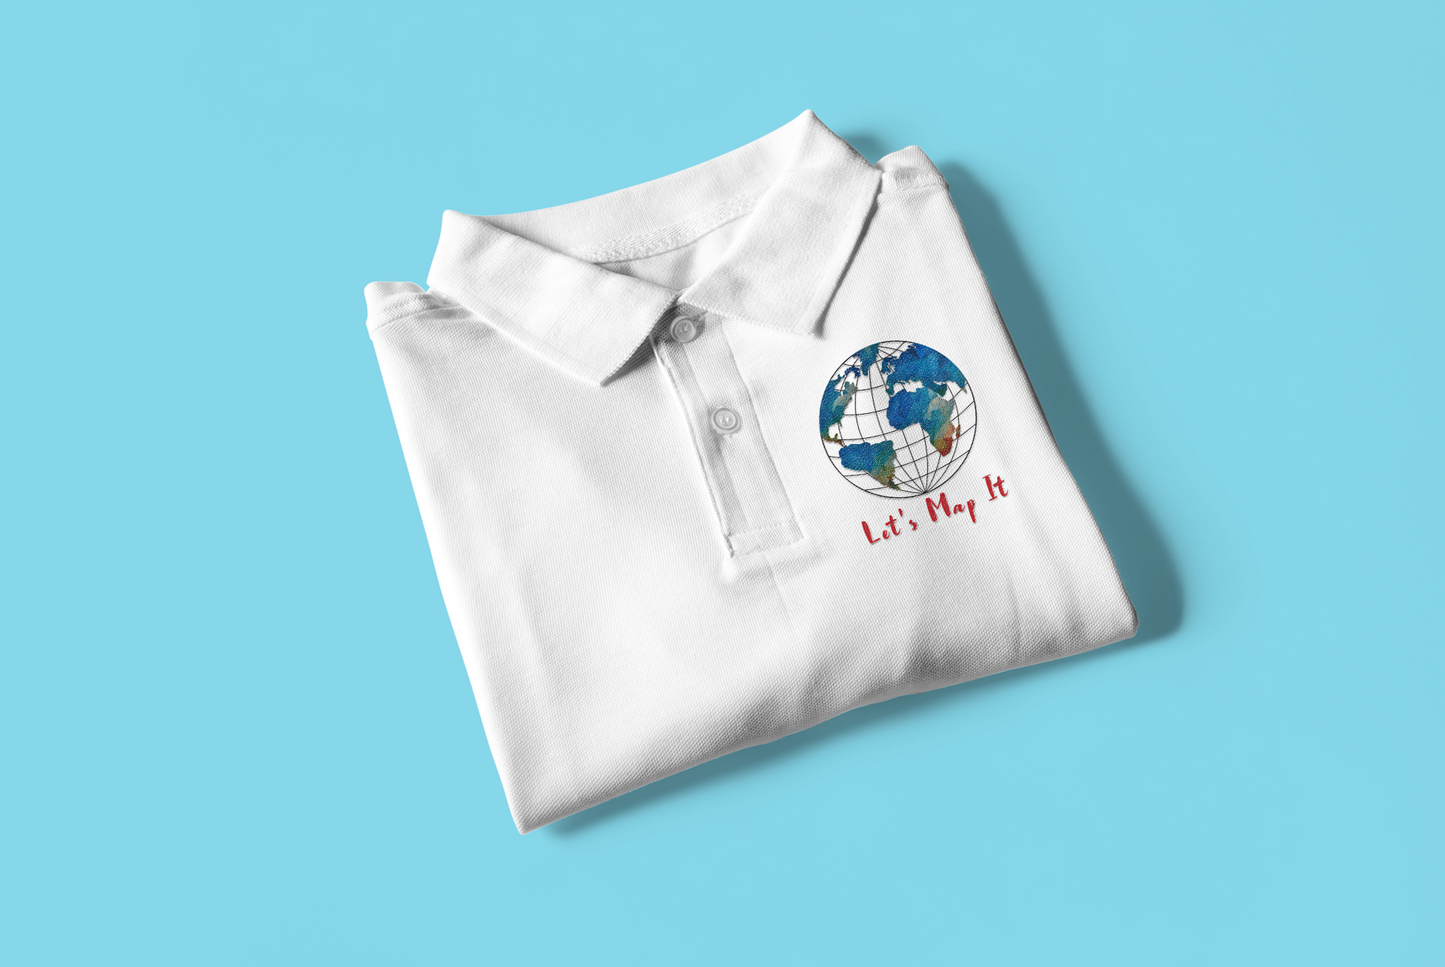 LET'S MAP IT POLO T SHIRT